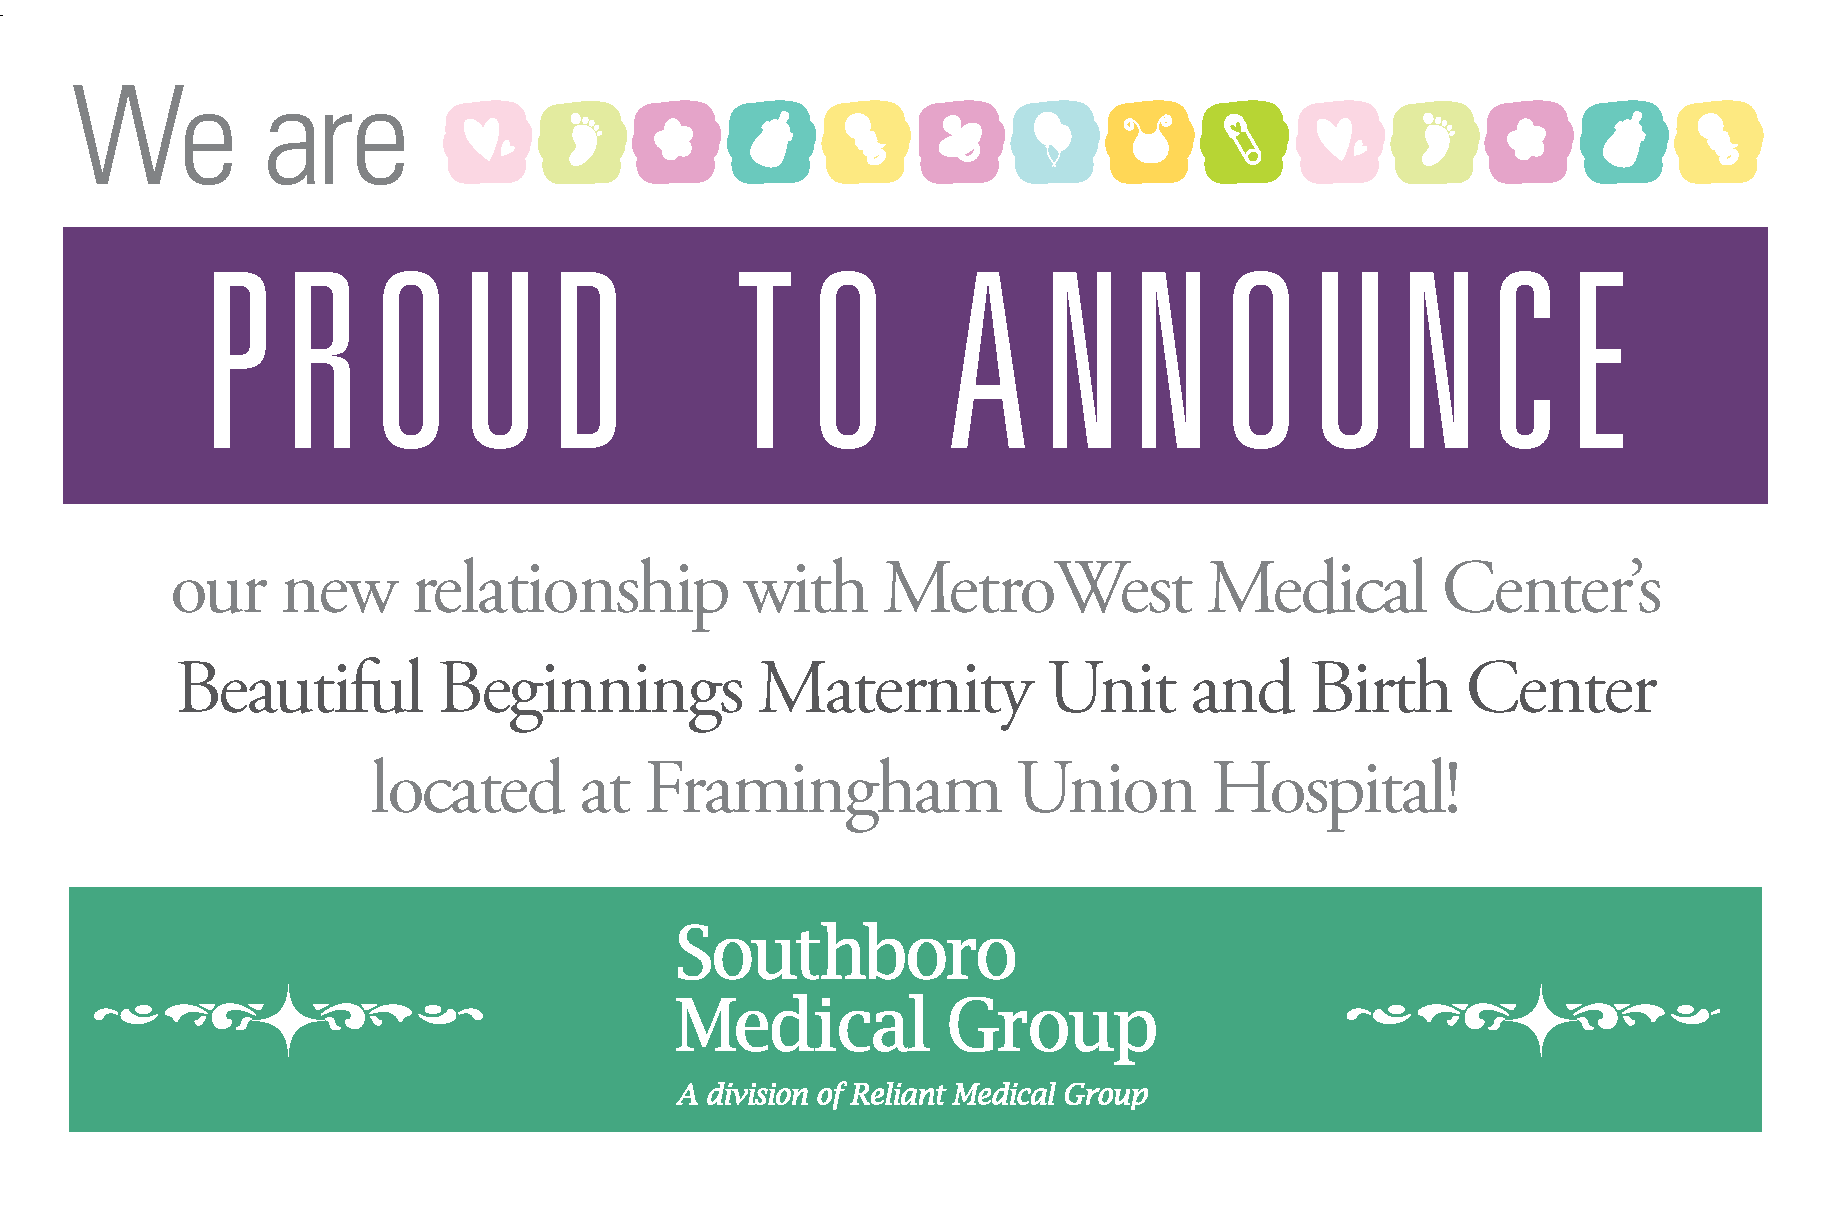 New Relationship With MetroWest Medical Center